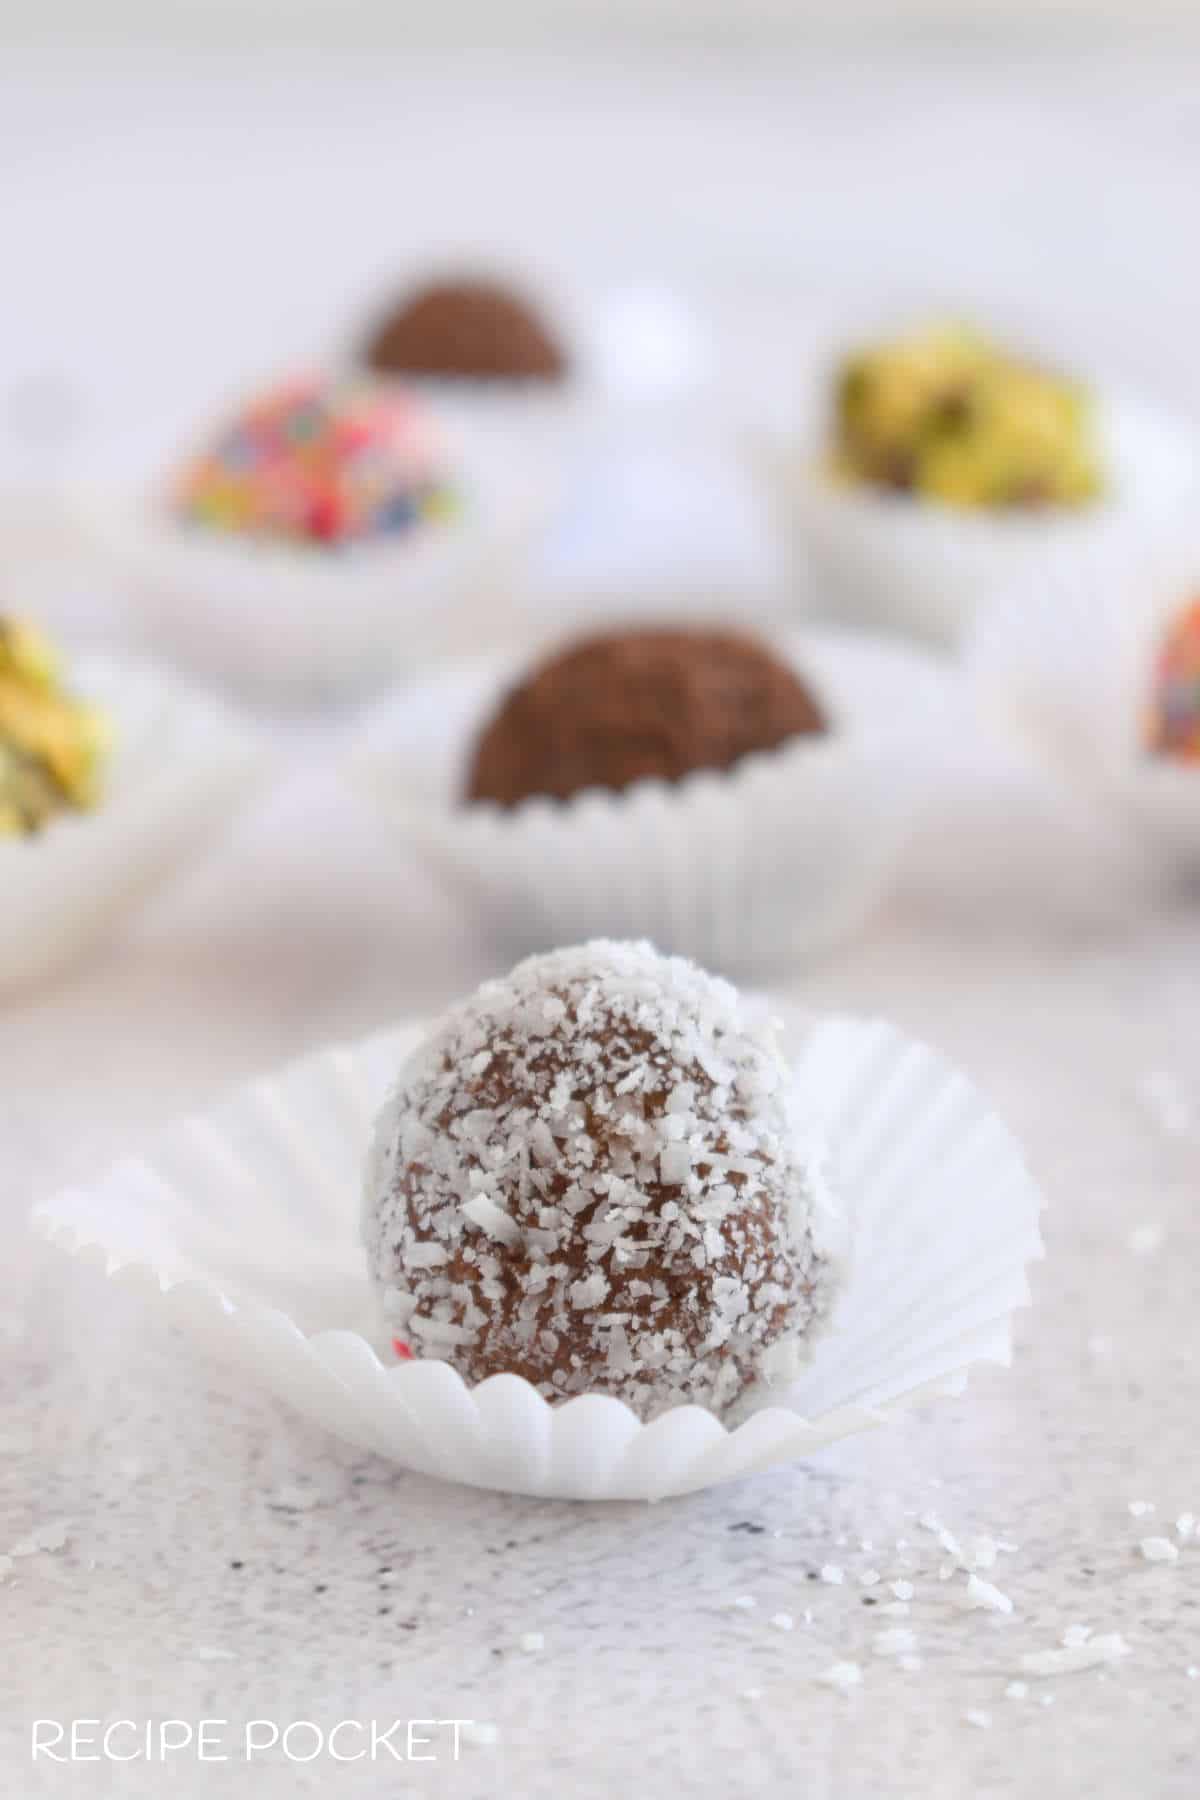 A close up of a truffle made with cake crumbs coated in coconut.